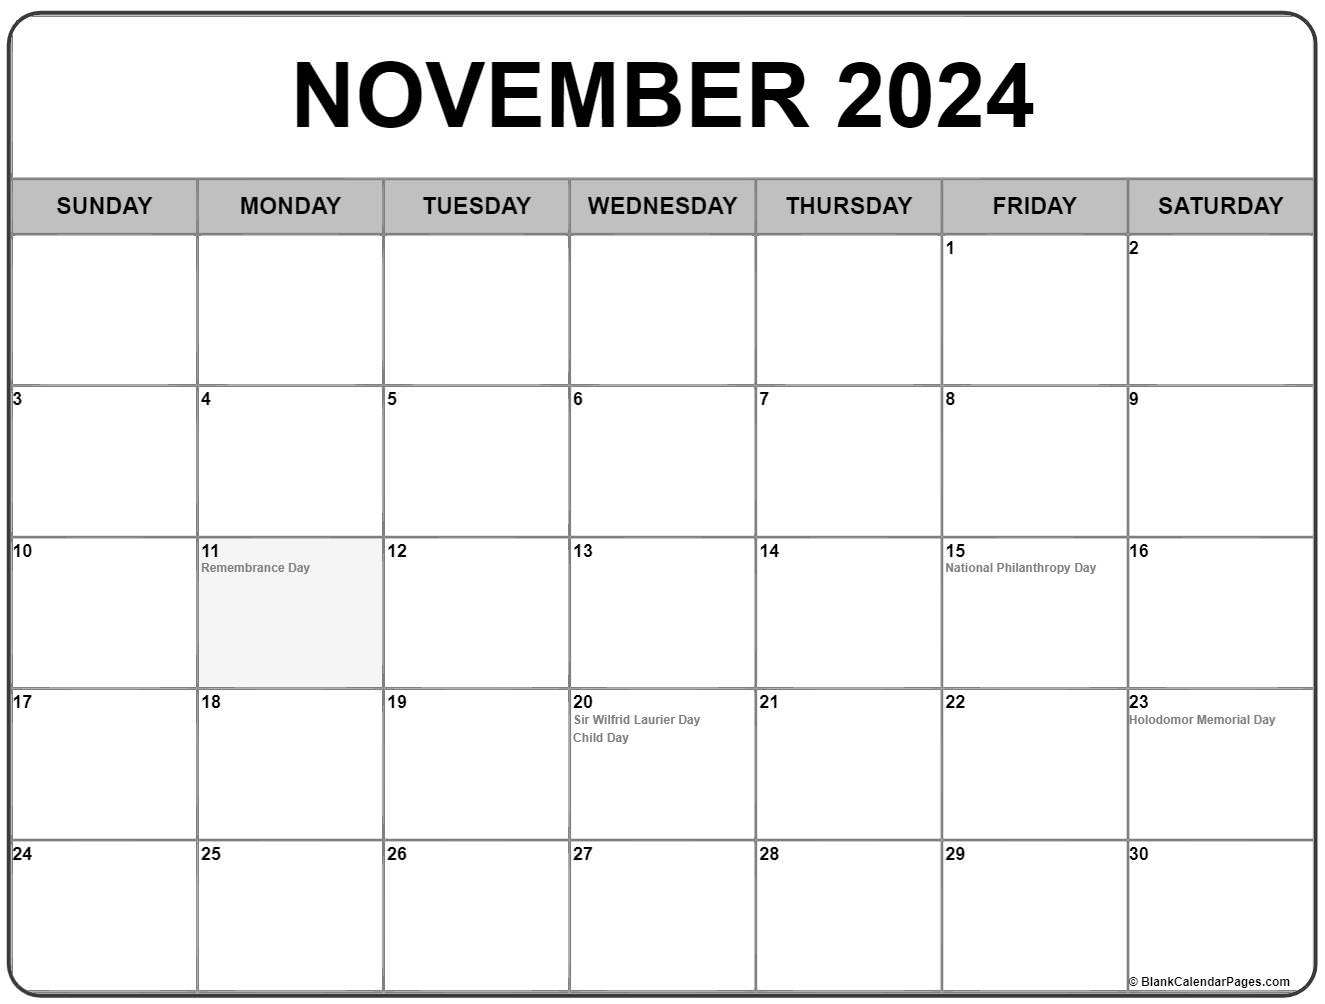 collection-of-november-2020-calendars-with-holidays